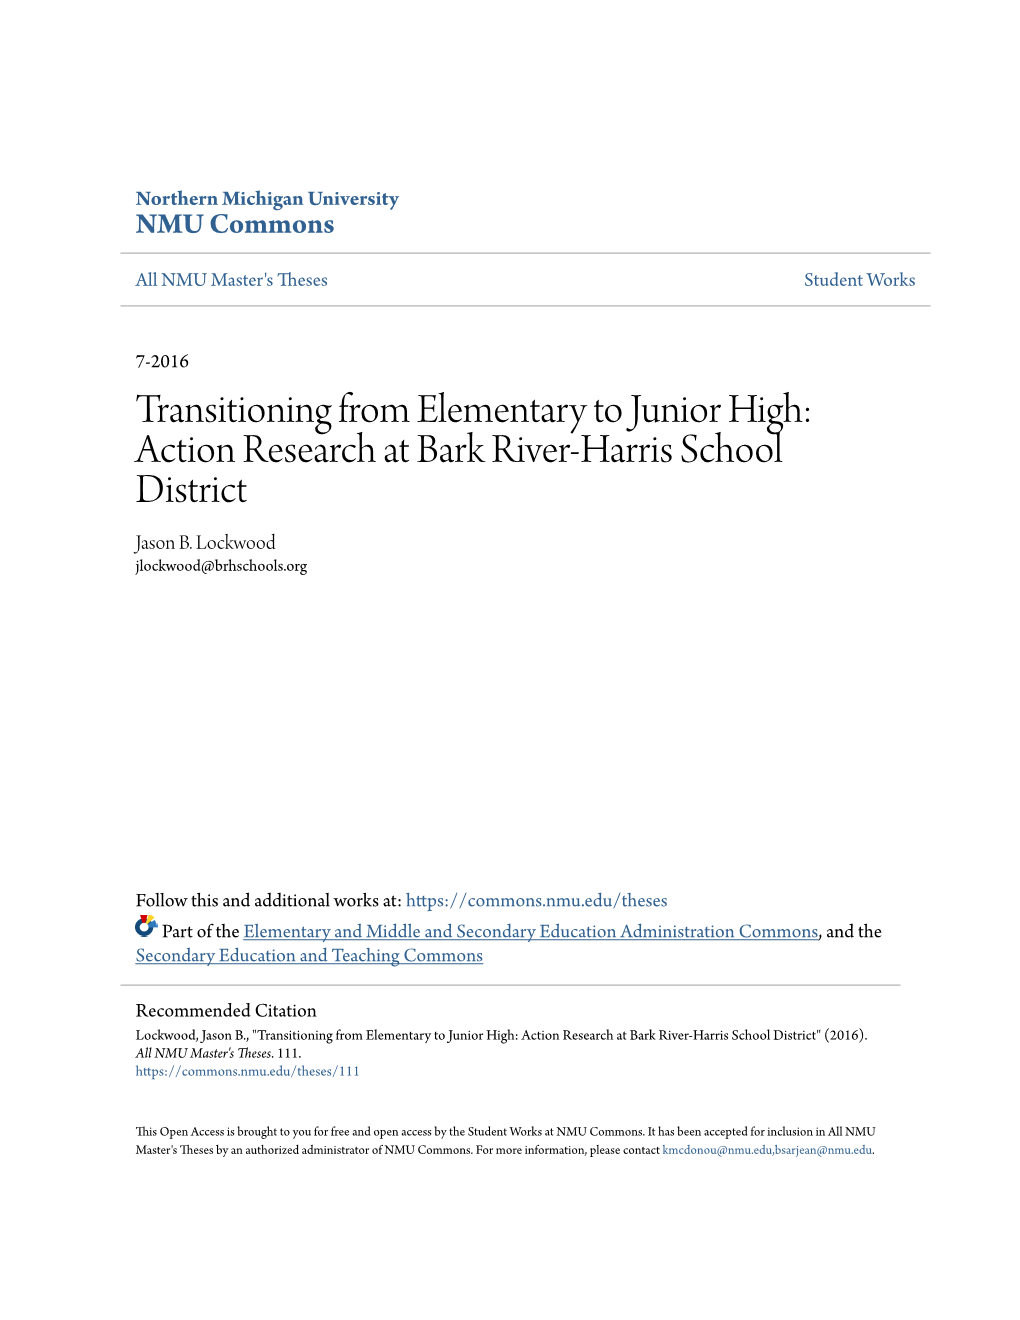 Transitioning from Elementary to Junior High: Action Research at Bark River-Harris School District Jason B